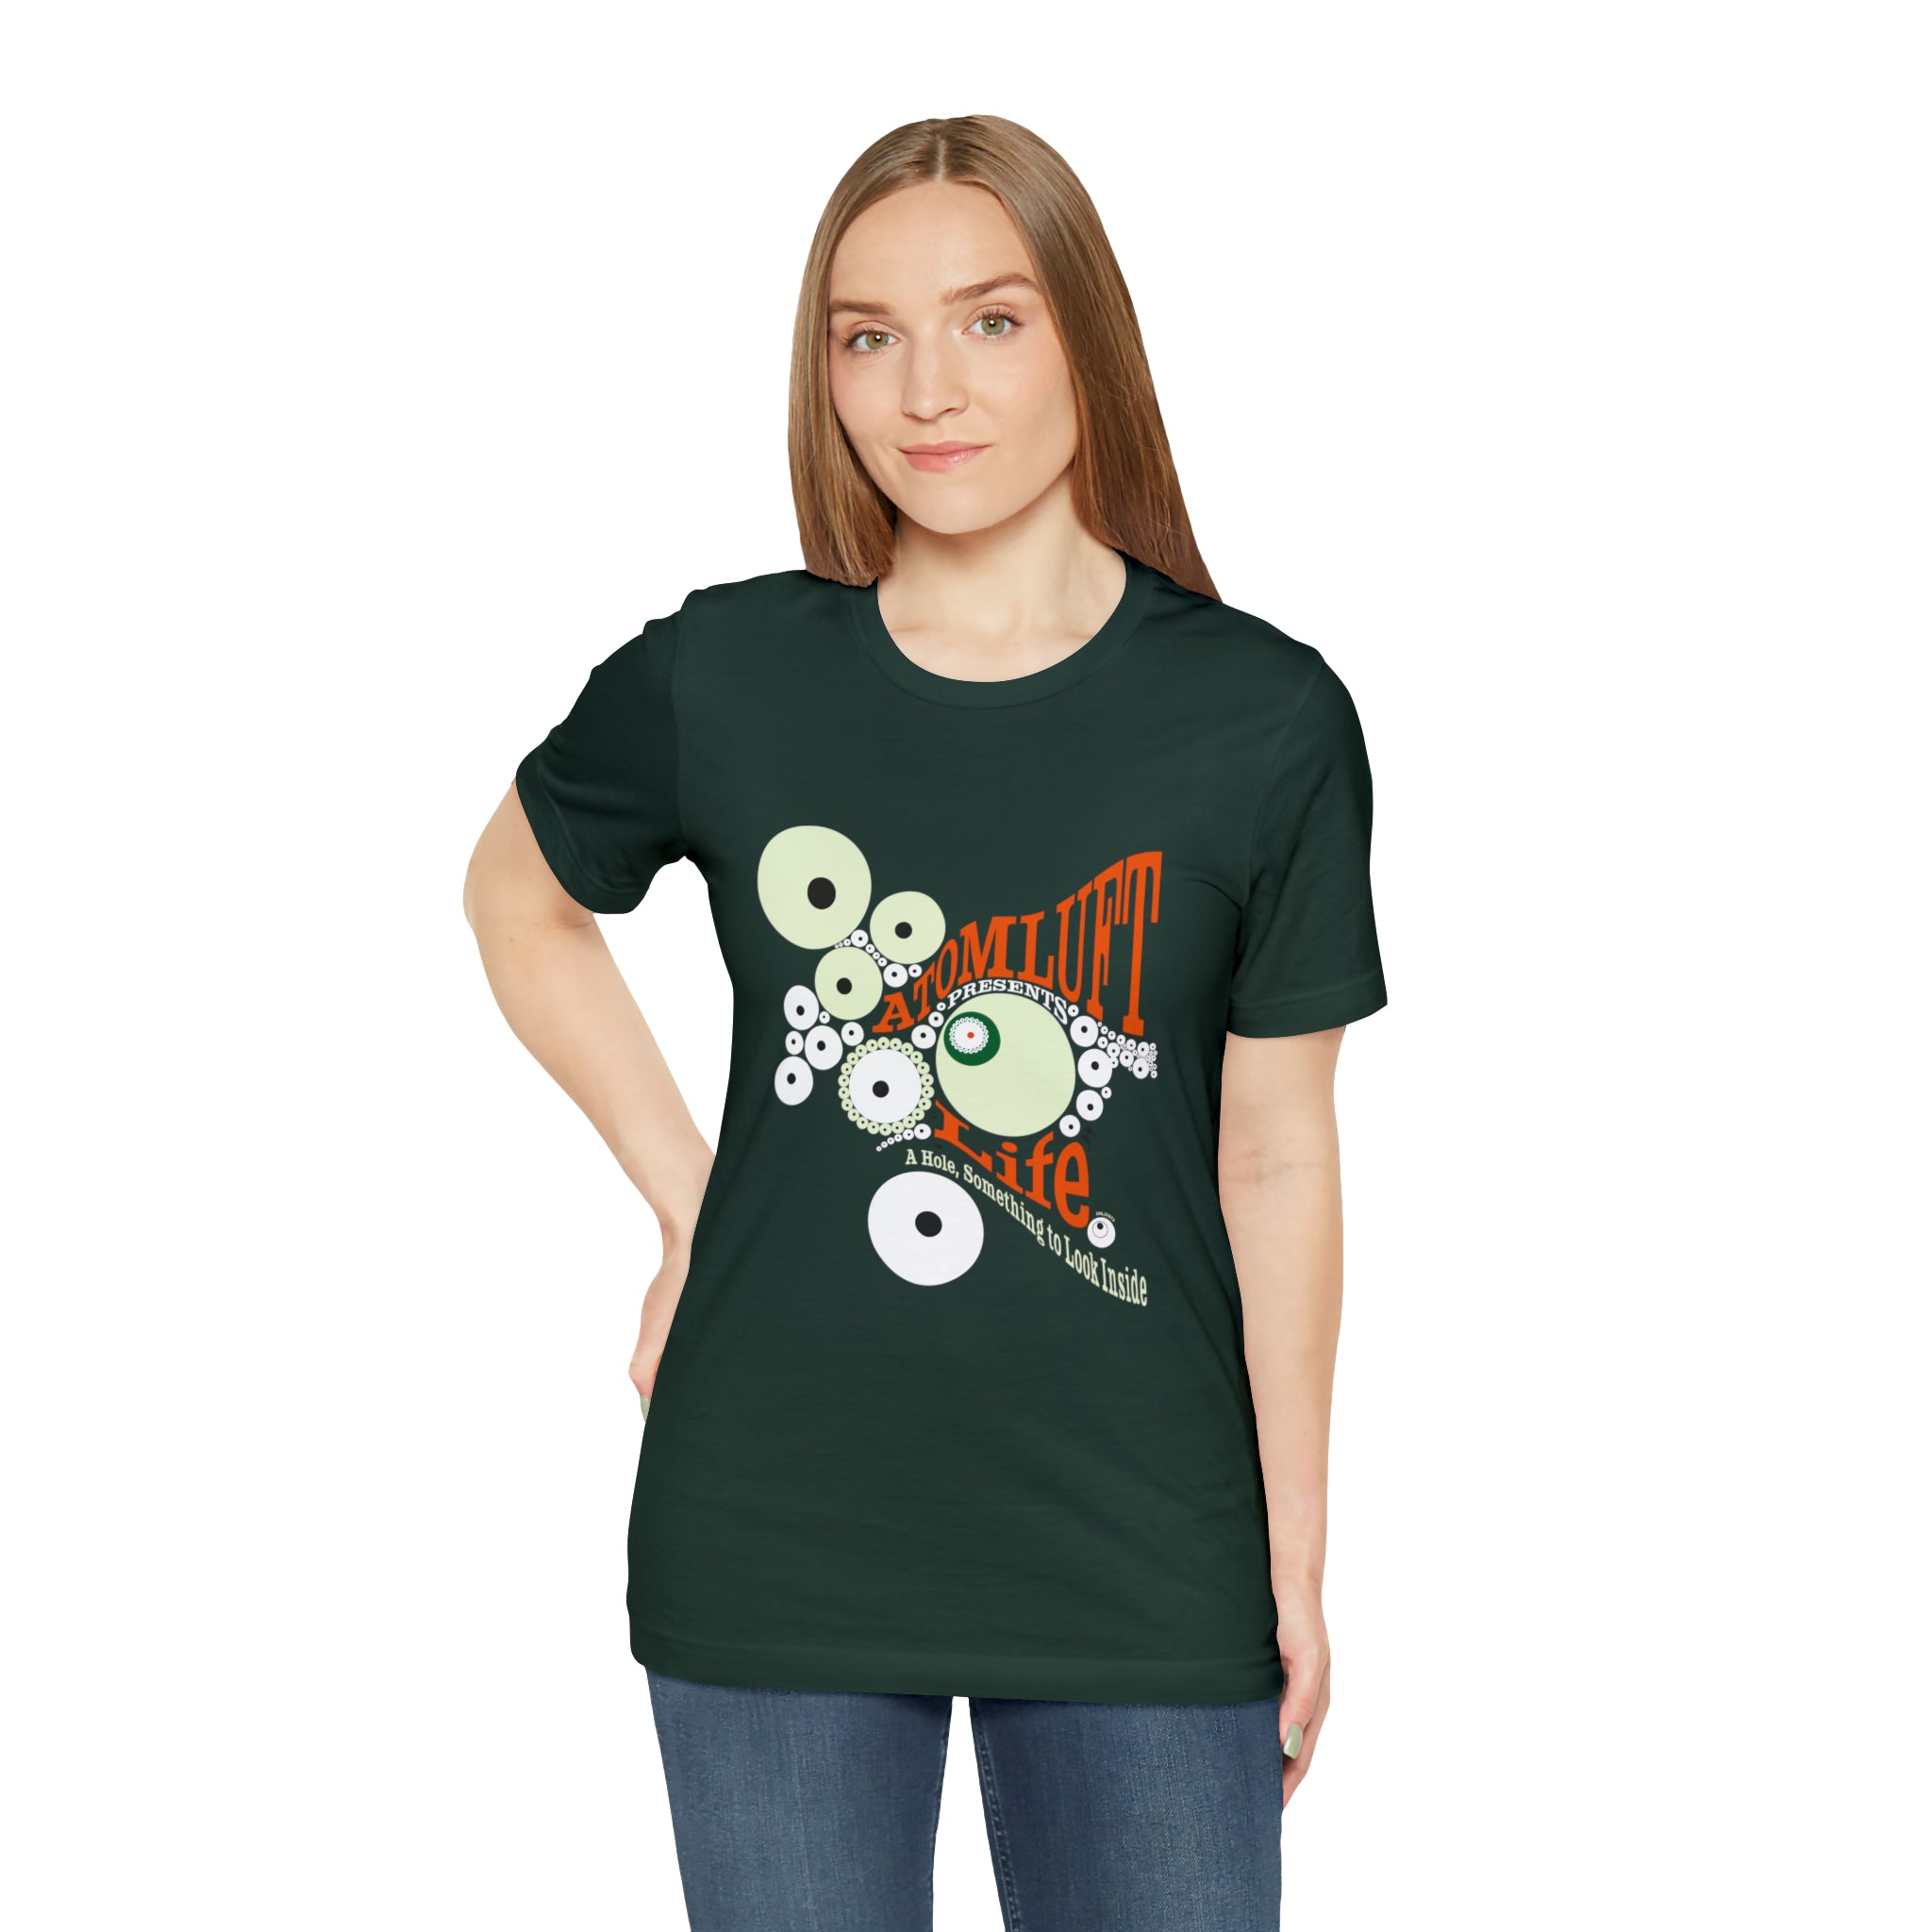 Atomluft - Life (Green + all colors) T-Shirt